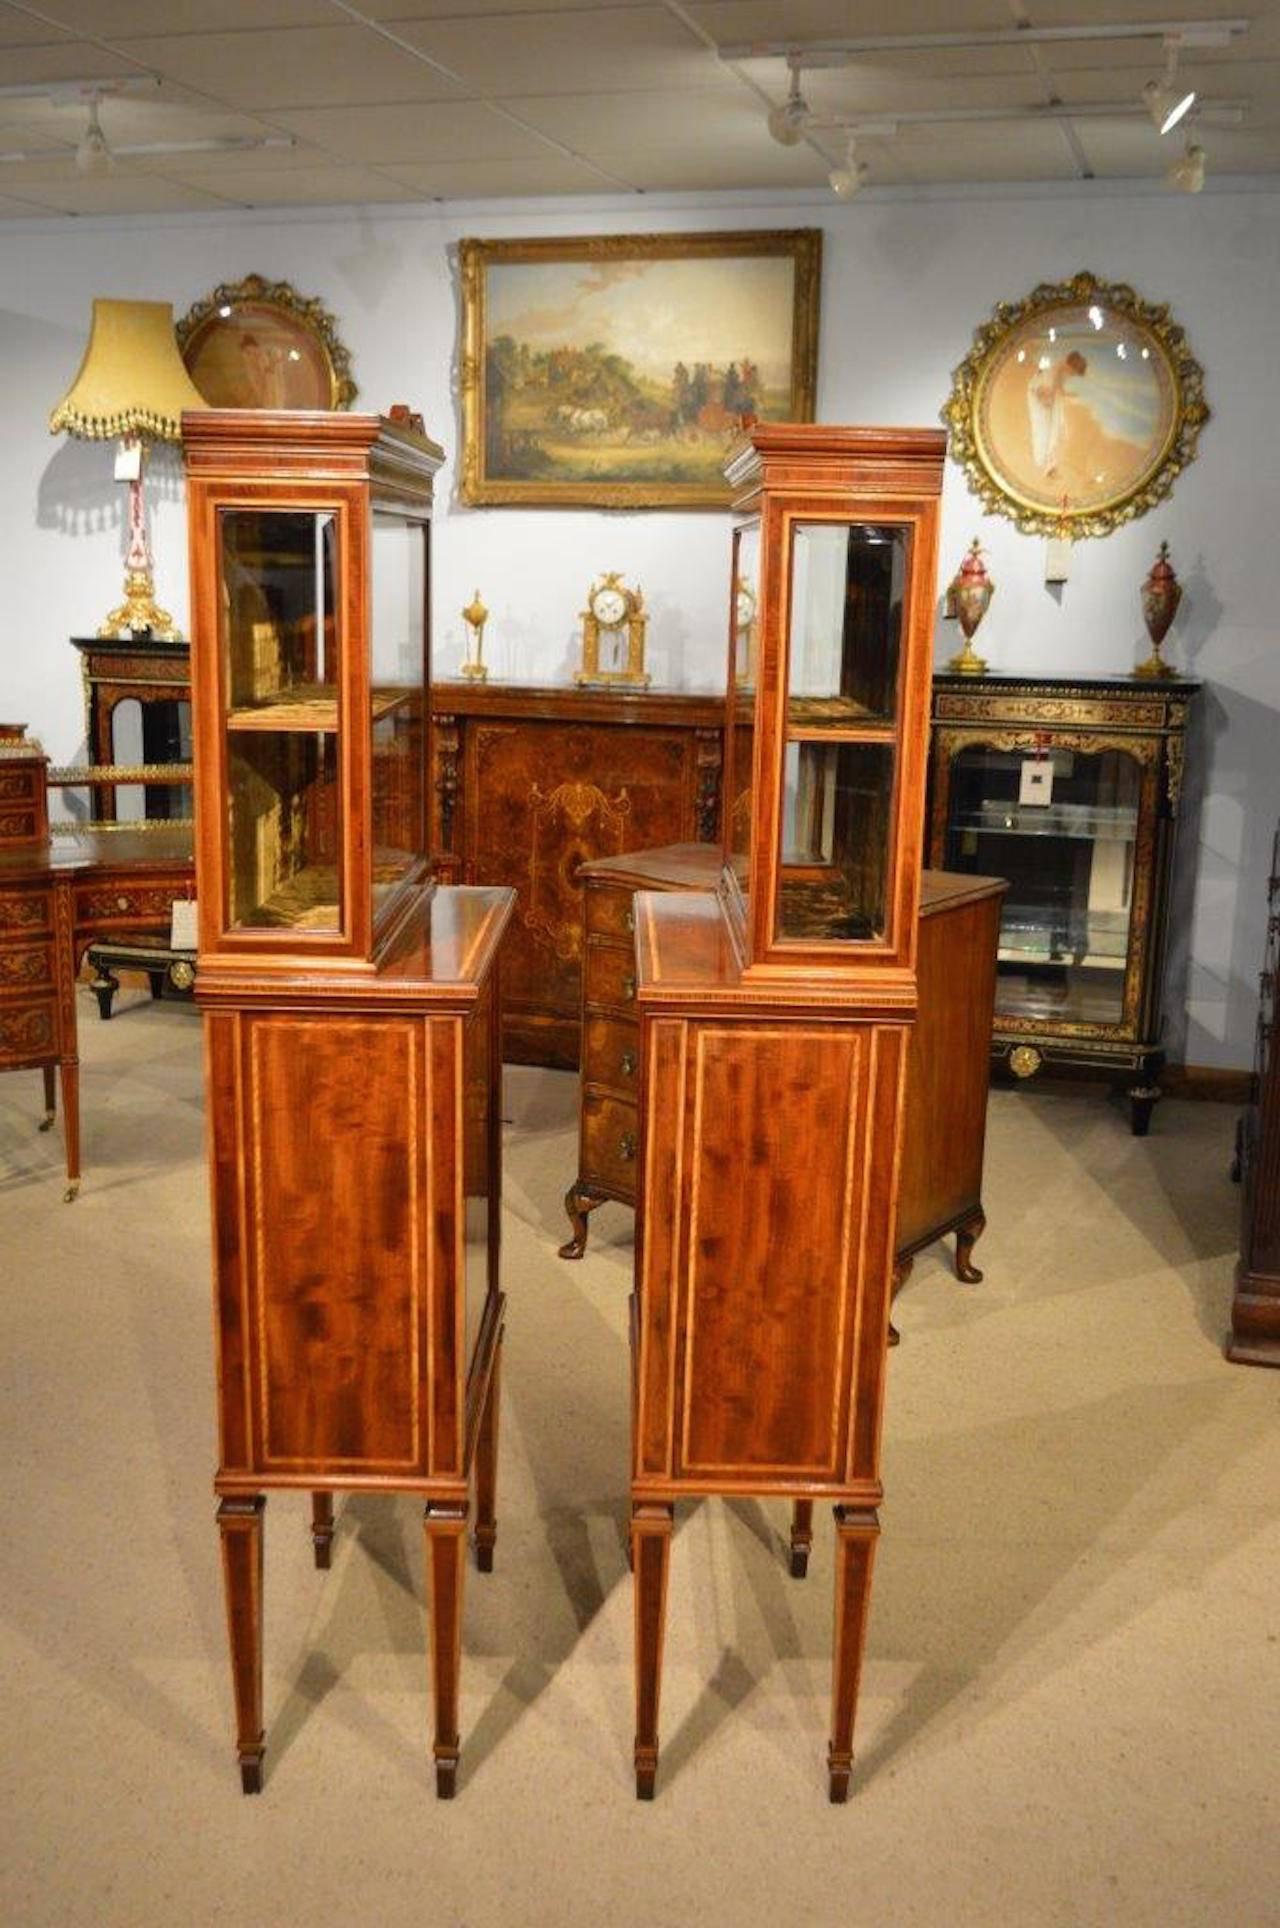 A fine quality pair of Edwardian Period fiddleback mahogany inlaid cabinets. Each with a glazed bevelled glass upper display section with a velvet lined shelved interior and bevelled glazed ends. The lower sections constructed using the finest